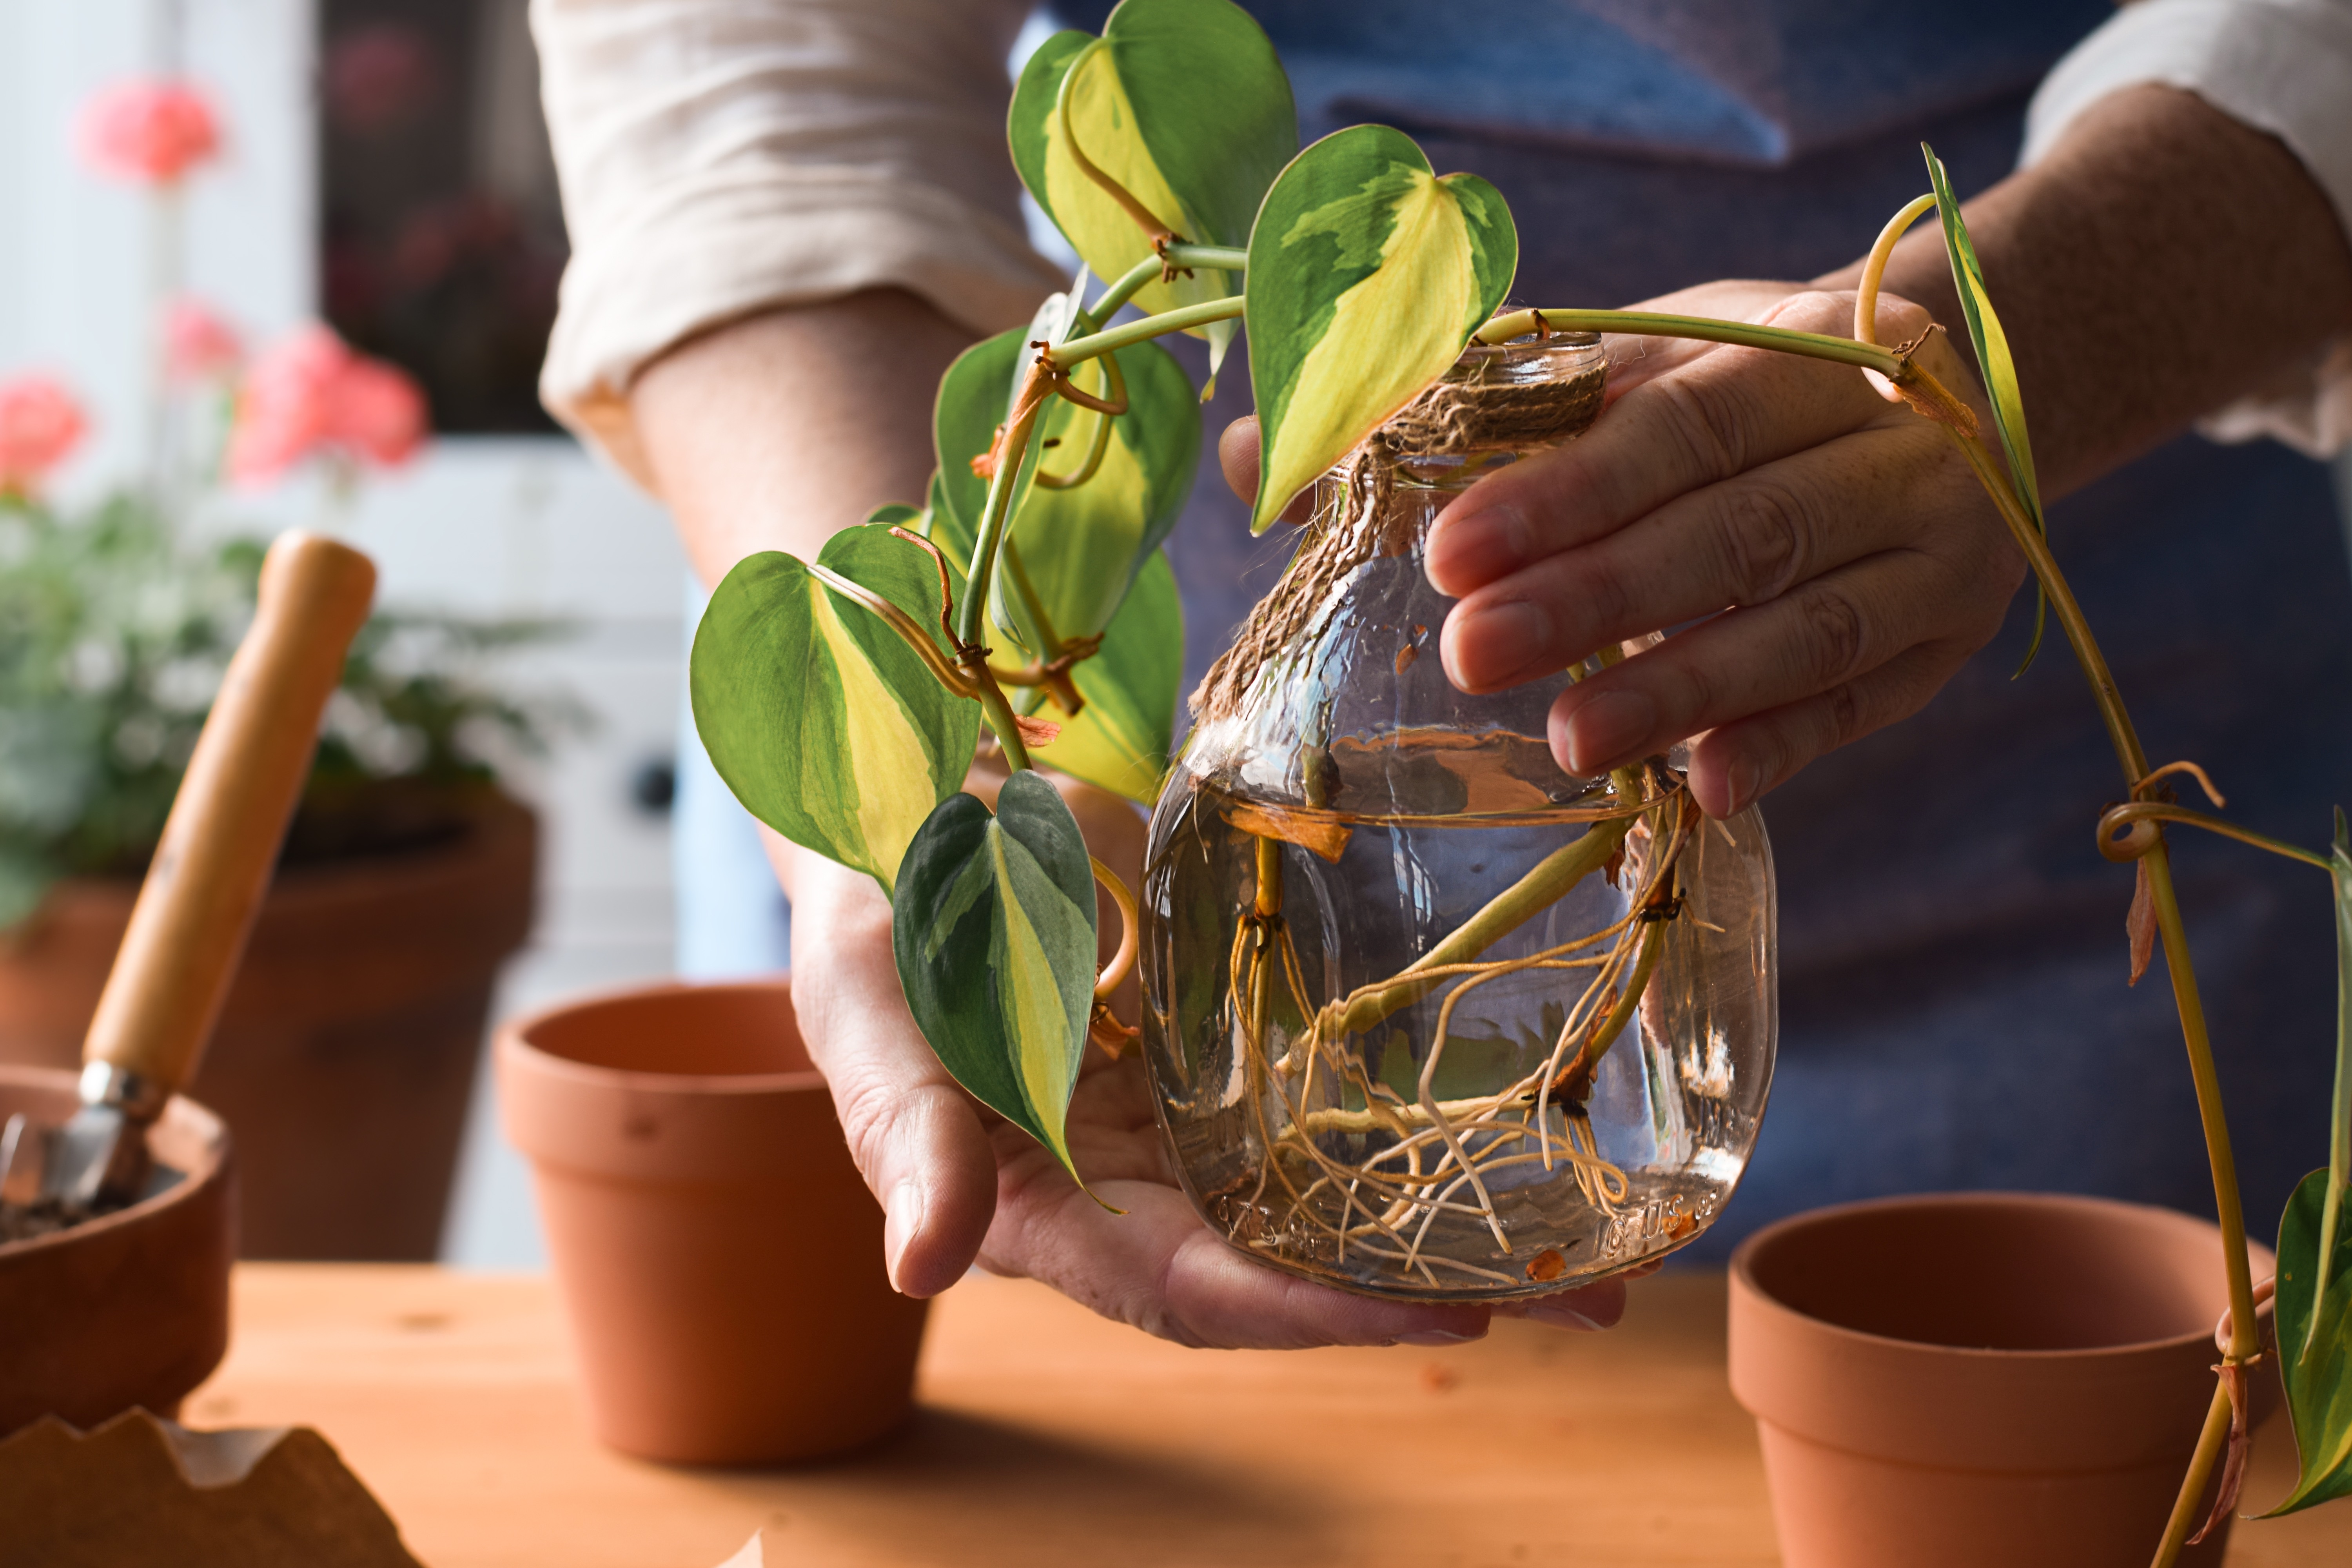 Woman holding jar with pothos plant cuttings with roots ready to be planted